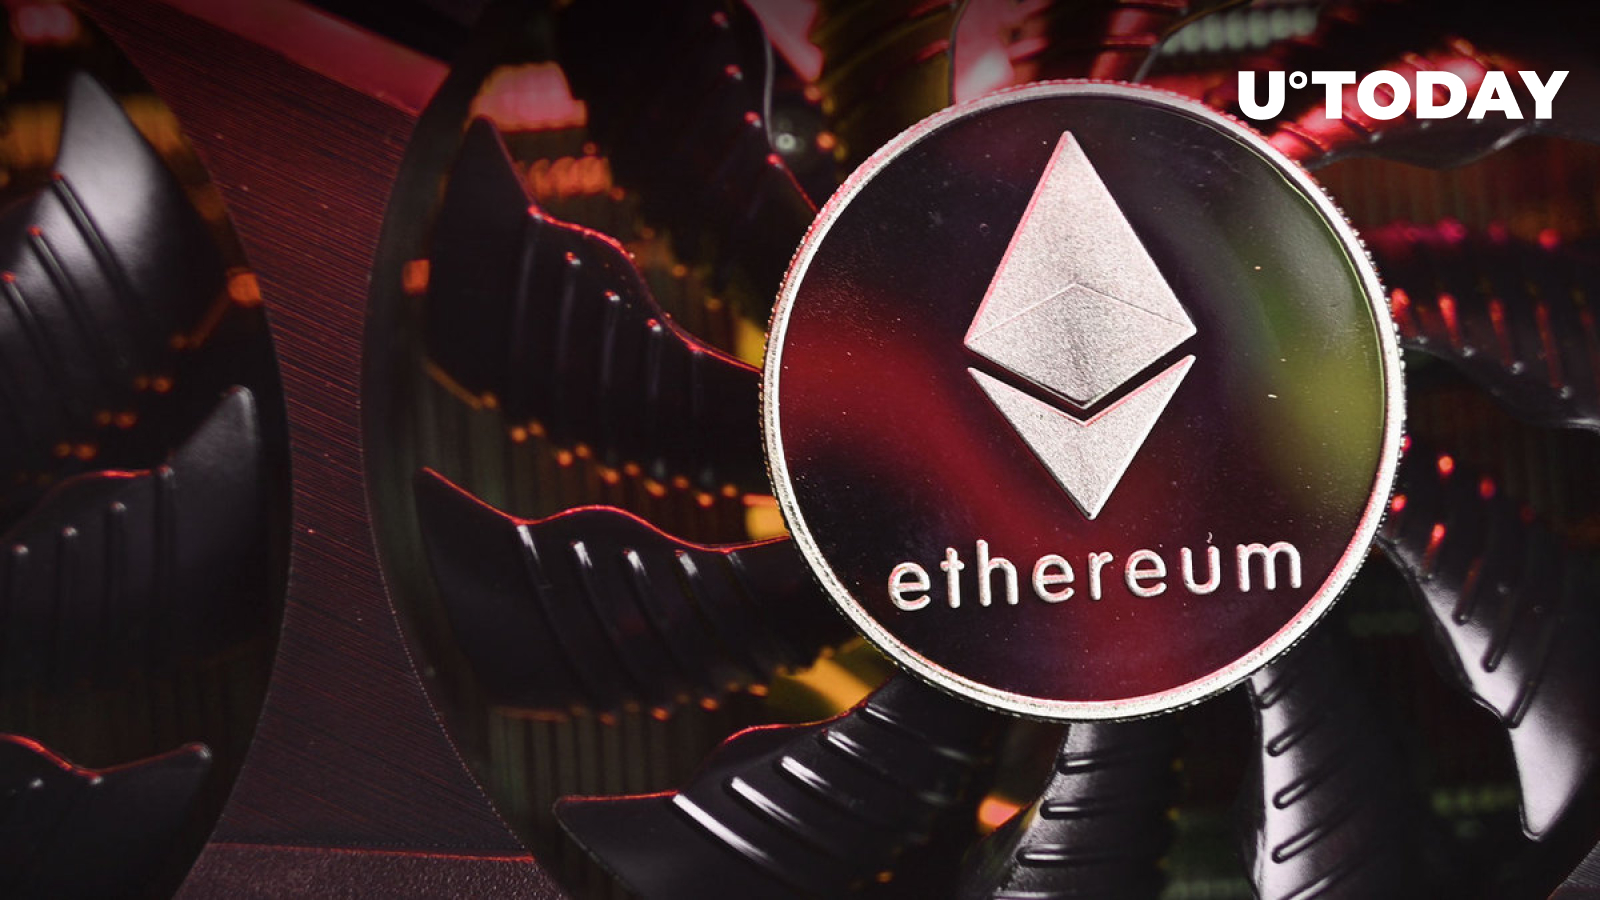 Ethereum Ropsten Testnet Shutting Down, Here’s What You Need to Know